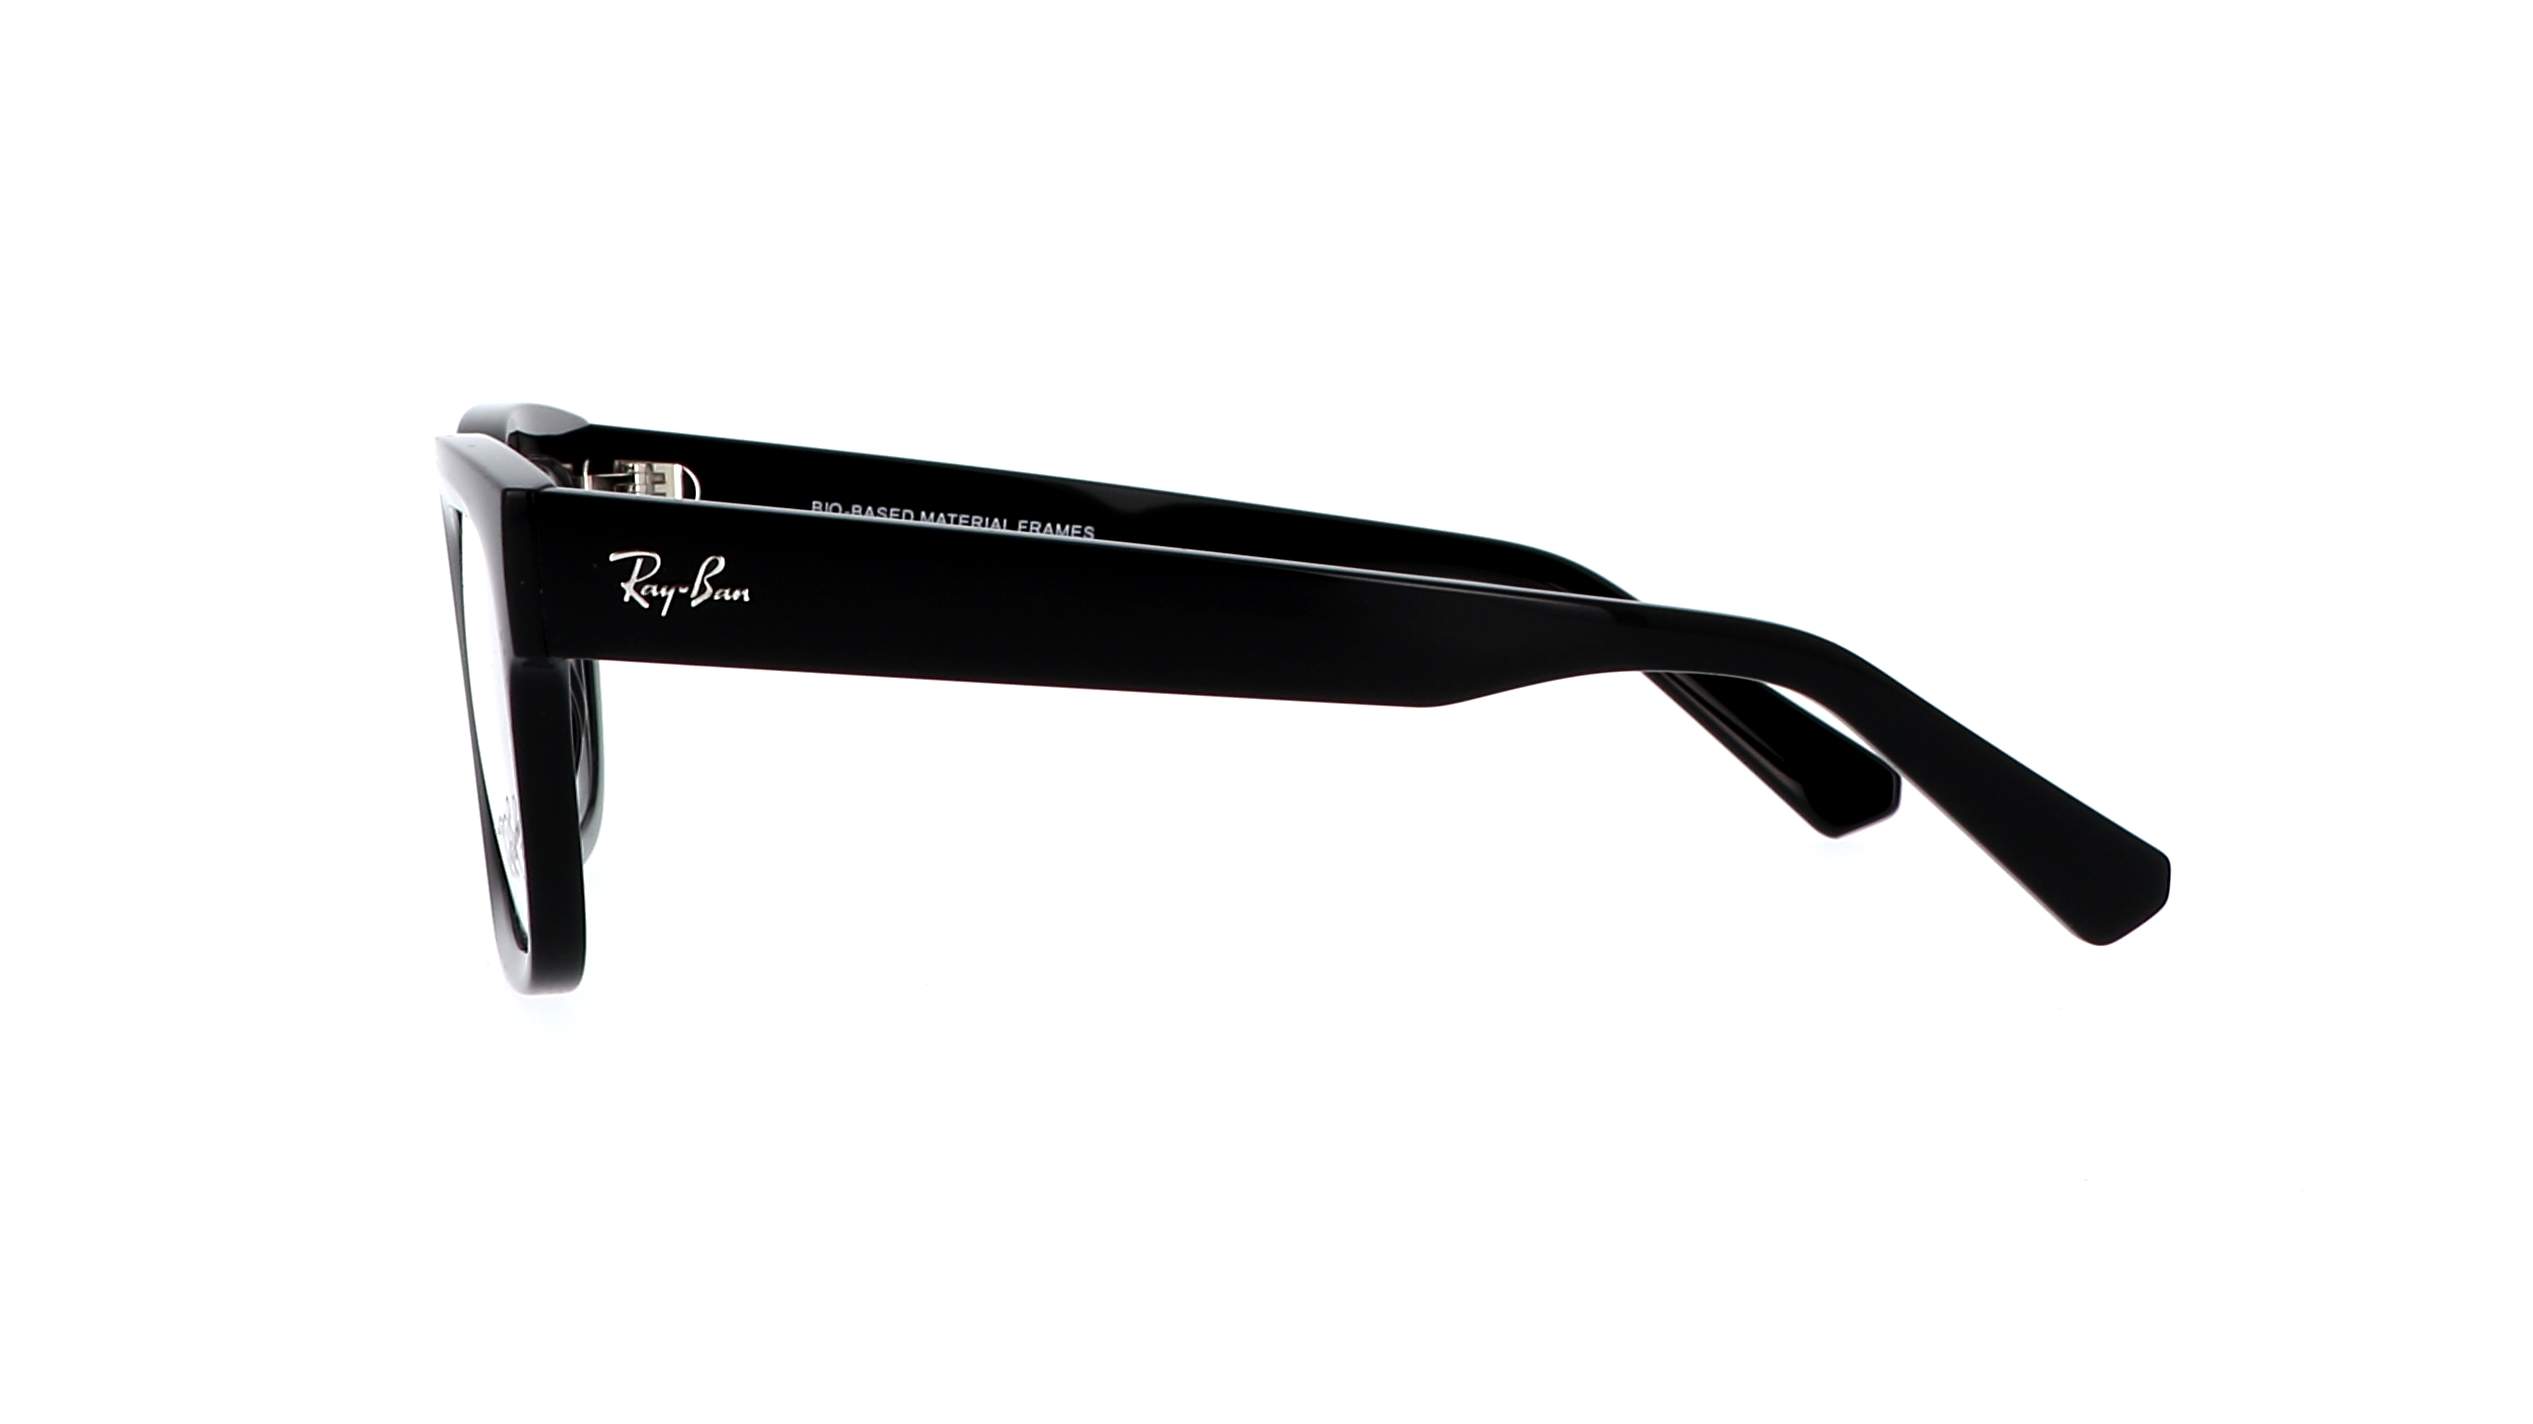 Eyeglasses Ray-Ban Chad RX7217 RB7217 8260 54-22 Black in stock | Price ...